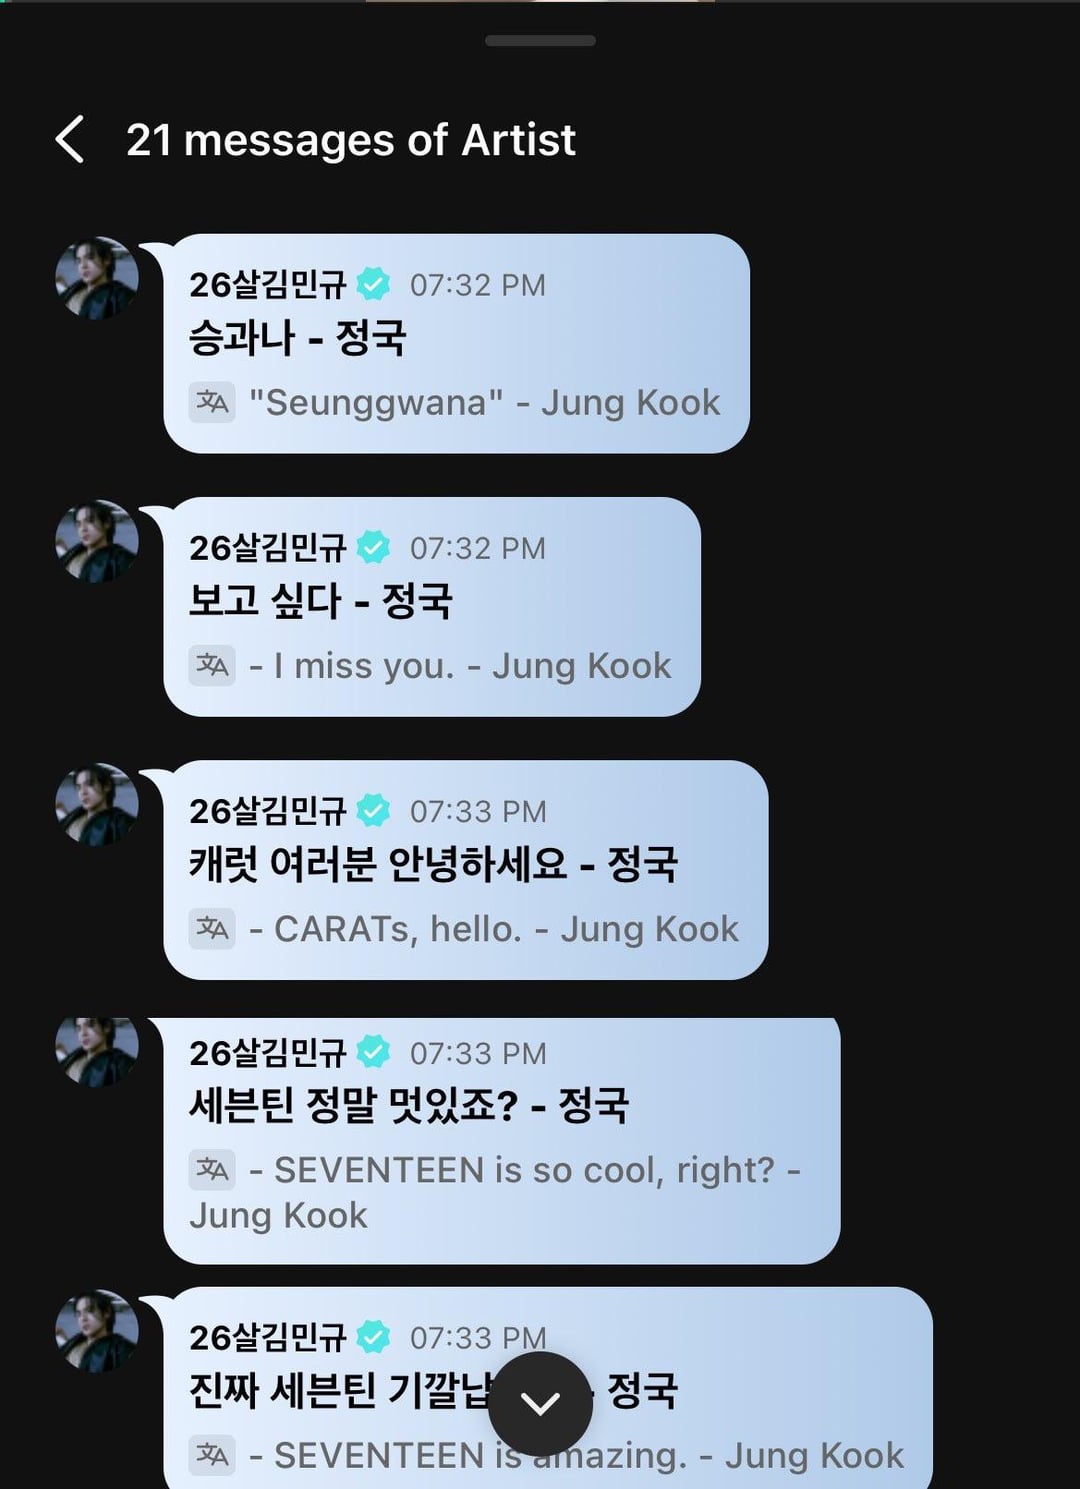 Jungkook commented on SEVENTEEN’s Seungkwan Weverse Live using Mingyu’s account - 051023